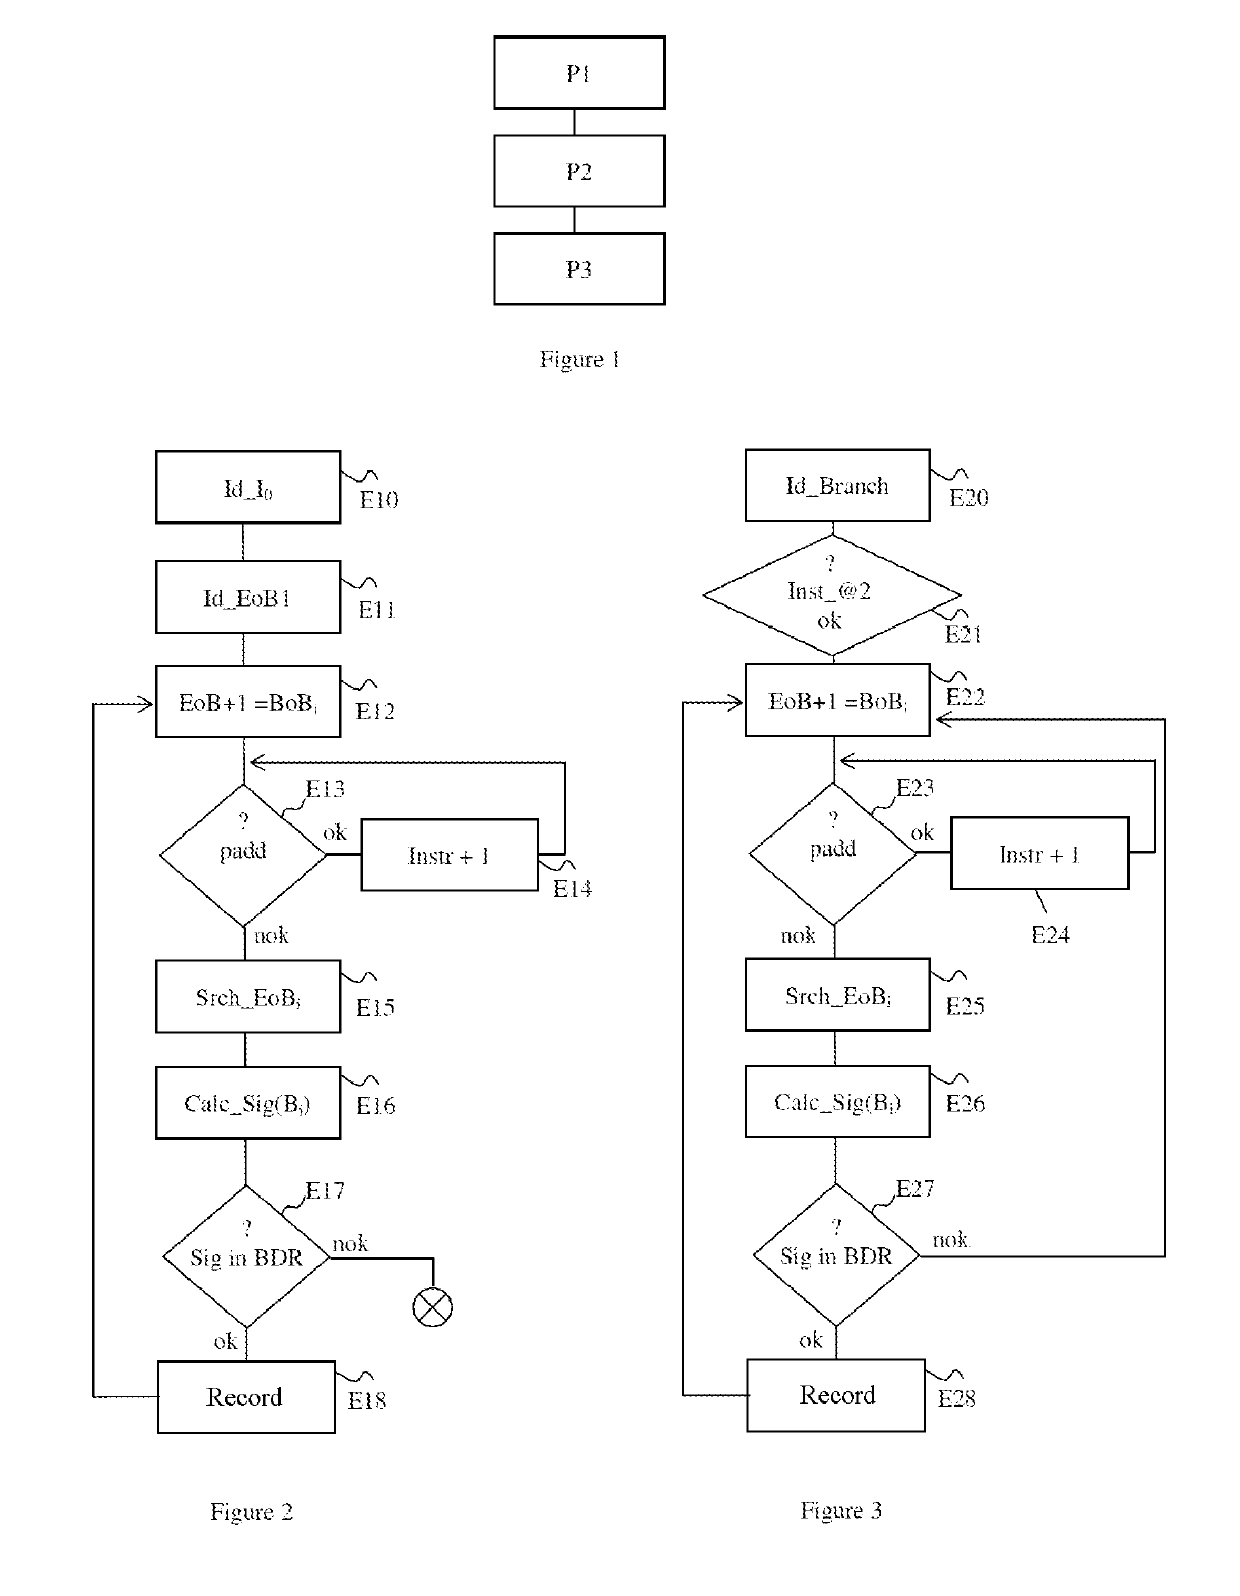 Method for identifying at least one function of an operating system kernel